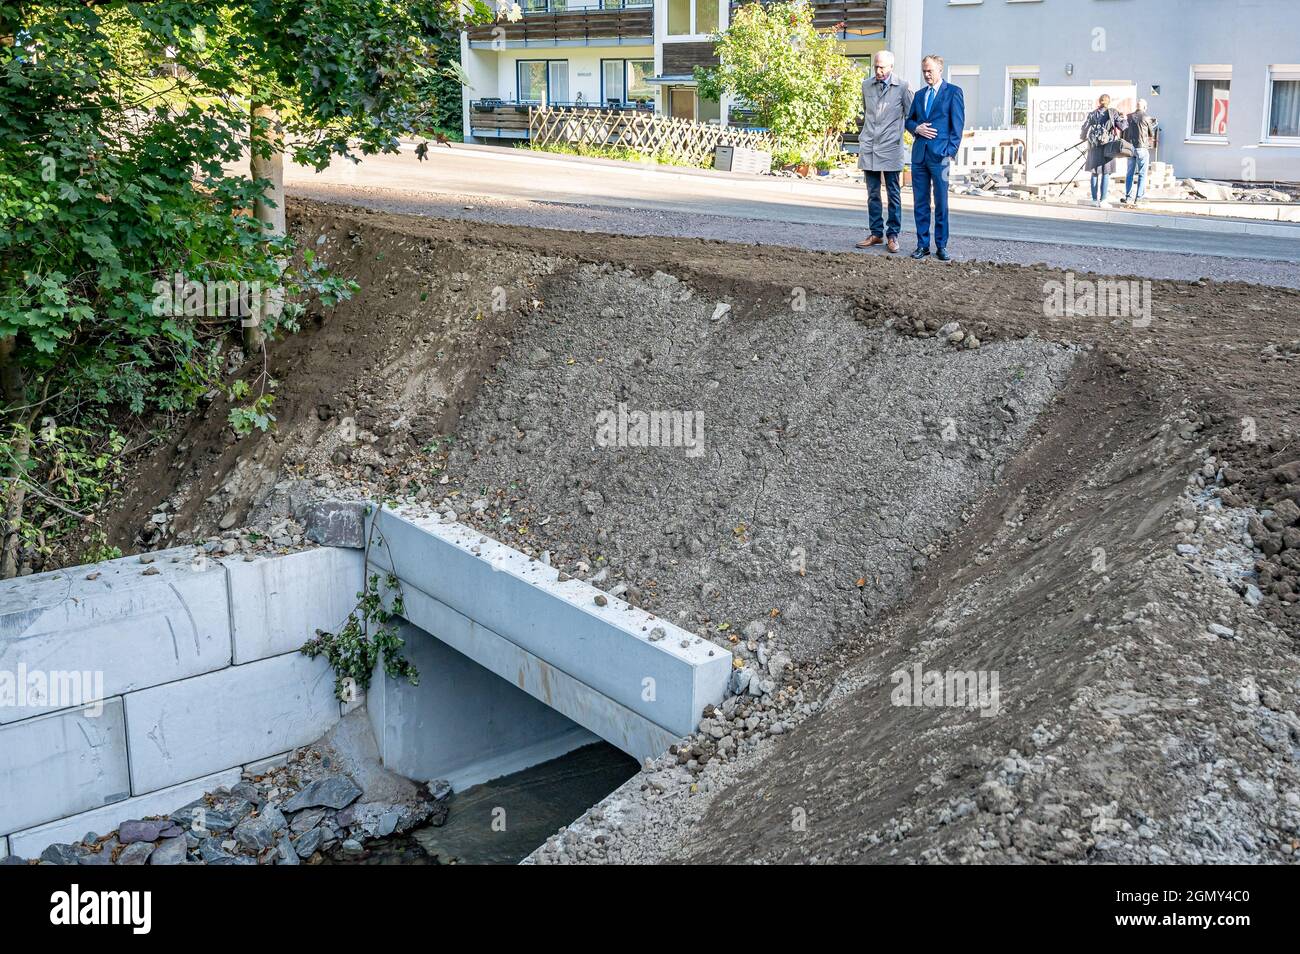 Hagen, Germany. 21st Sep, 2021. State Secretary Dr. Hendrik Schulte (r) inspects the construction site with Ludger Siebert (NRW State Road Construction Authority). In the Priorei district of Hagen, a bridge on the 701 trunk road (Osemundstraße) was inaugurated today after being rebuilt. The bridge was destroyed by the flood disaster last July and completely rebuilt in only two months construction time. Credit: Markus Klümper/dpa/Alamy Live News Stock Photo